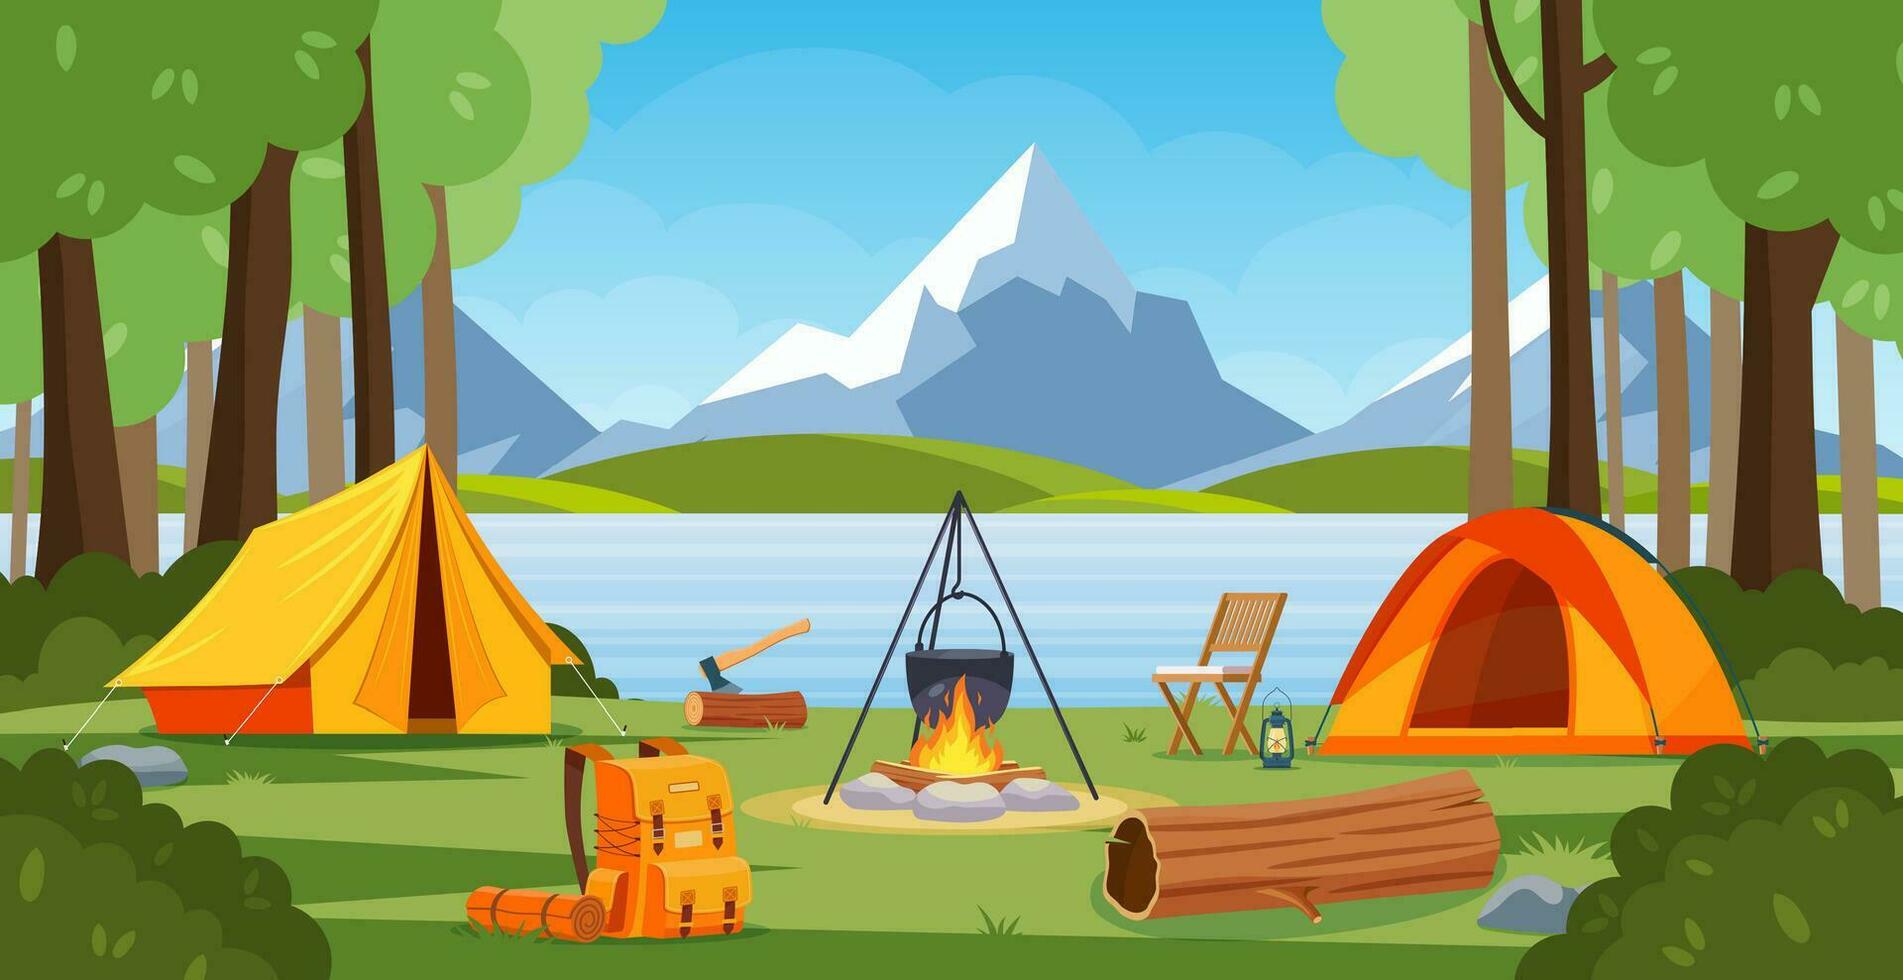 Summer camp in forest with bonfire, tent, backpack and lantern. cartoon landscape with mountain, forest and campsite. Equipment for travel, hiking. Vector illustration in flat style